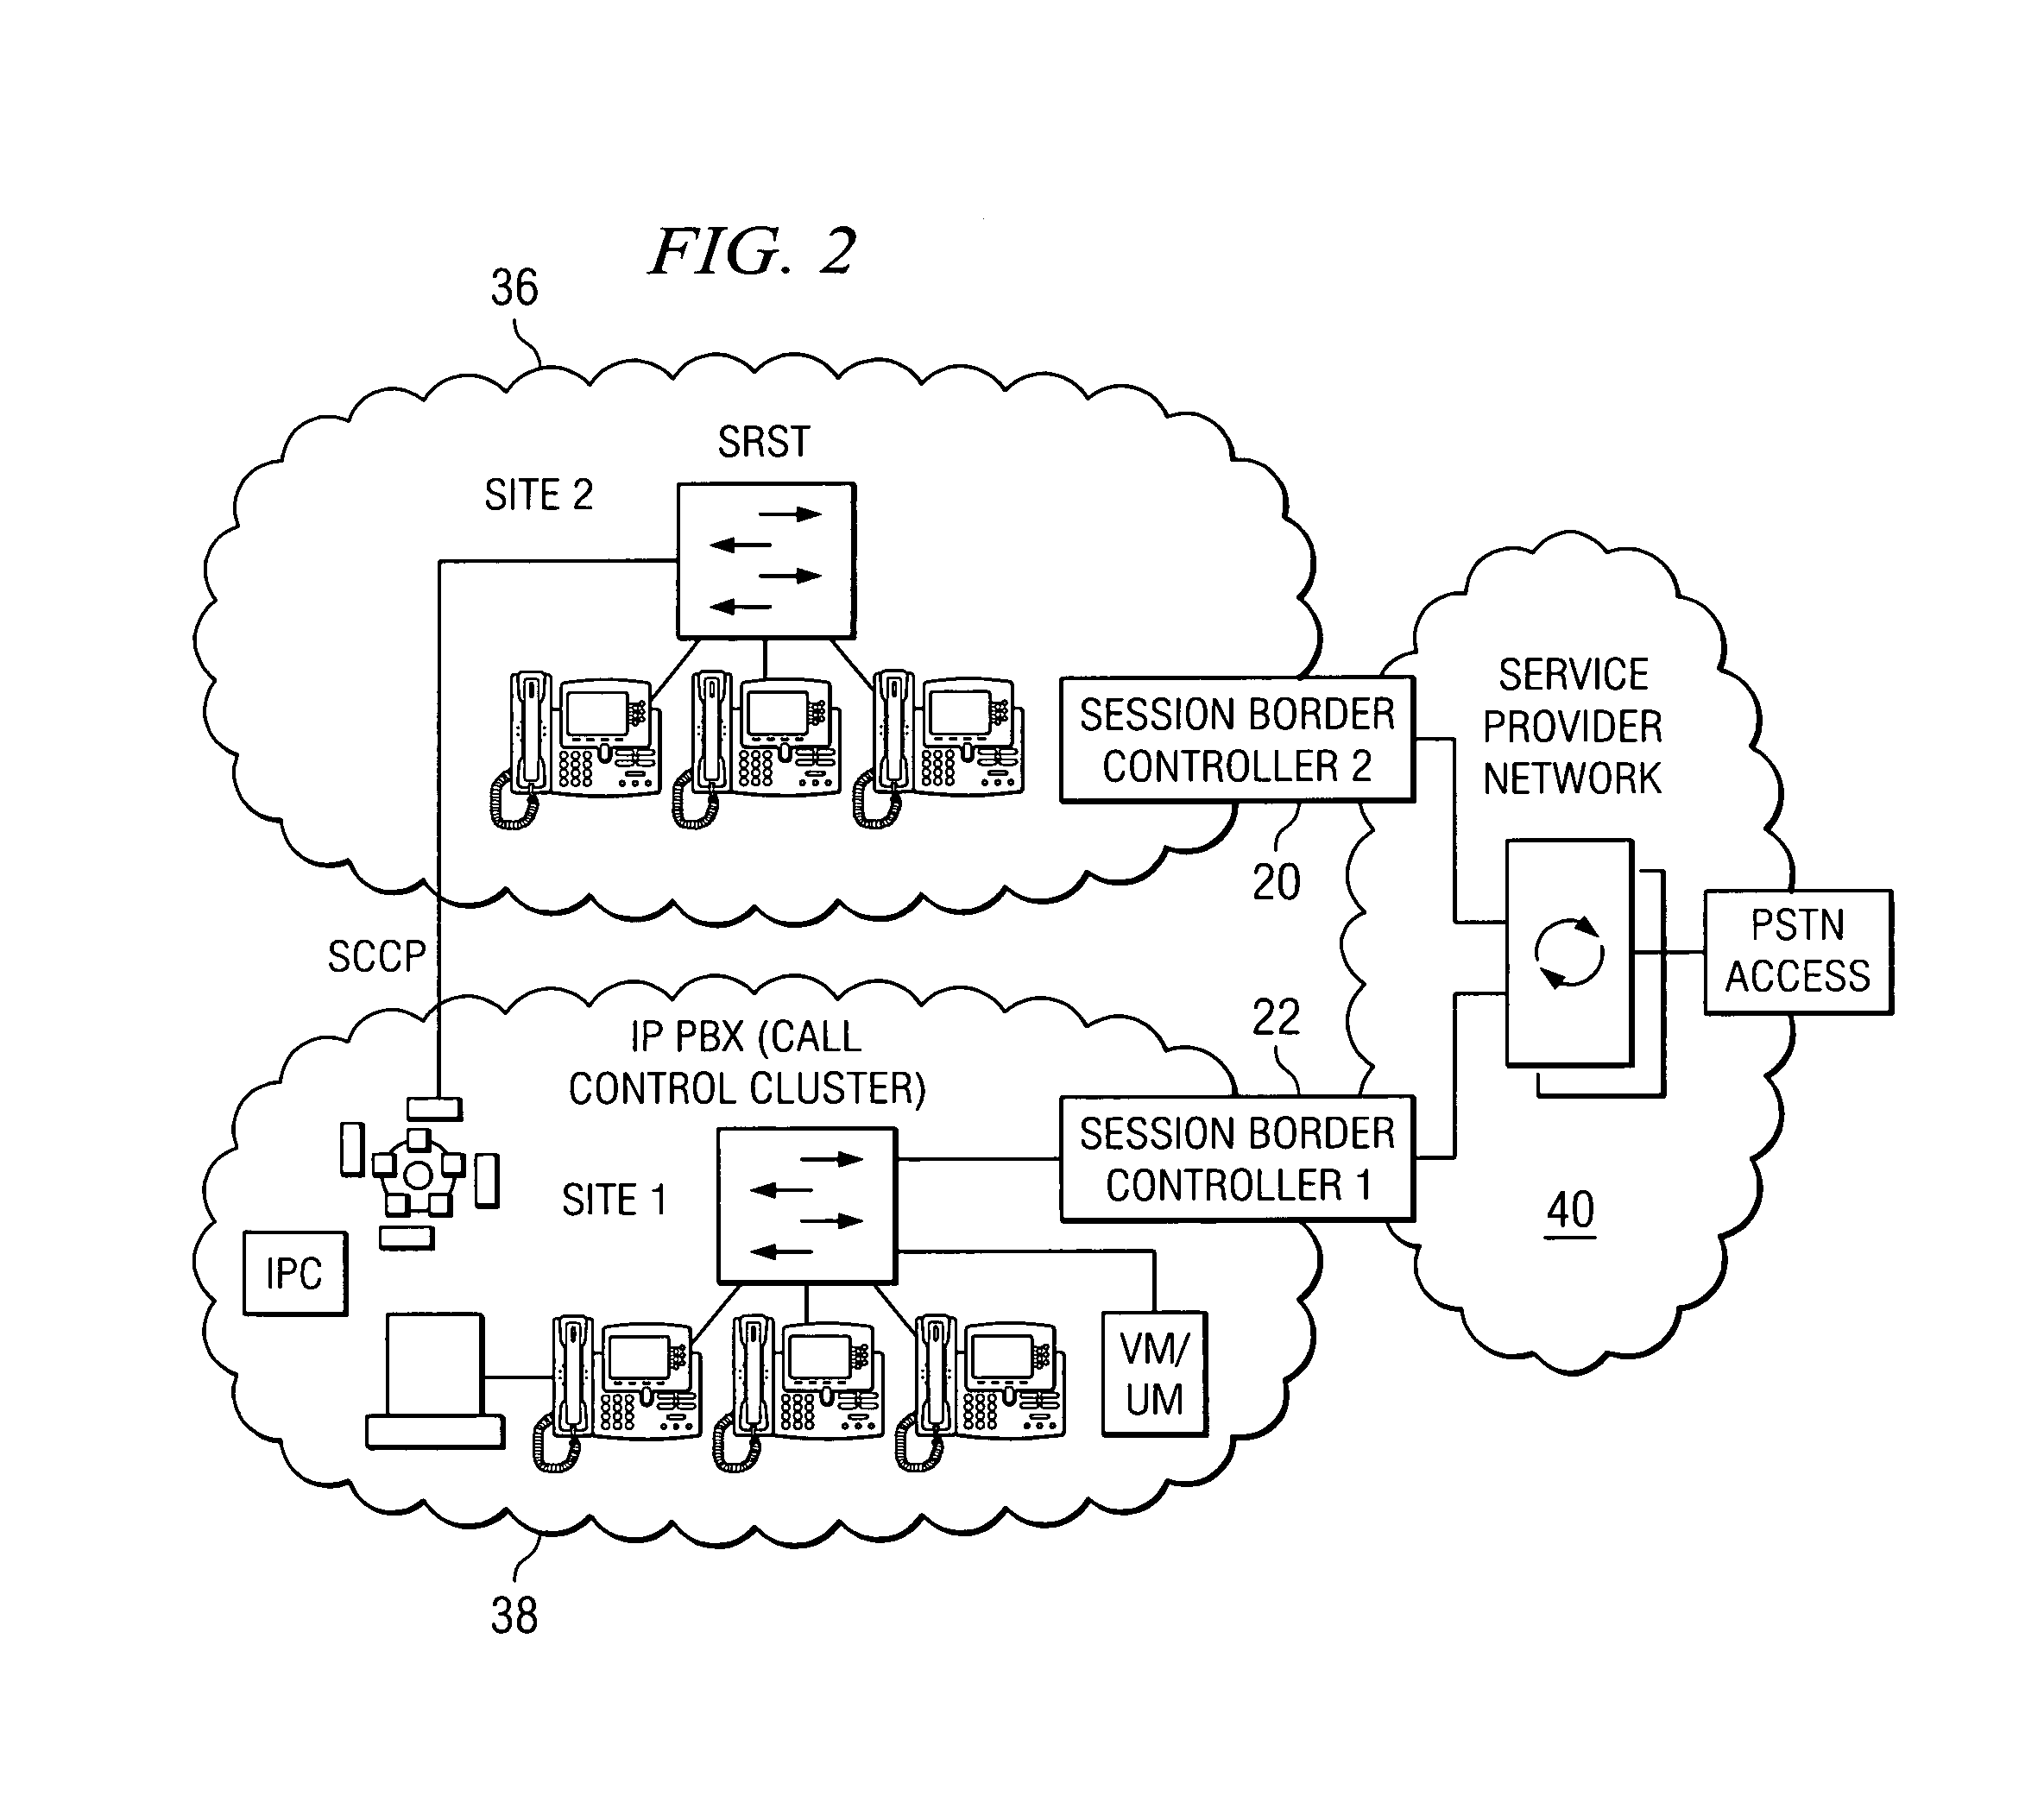 System and method for optimizing communications between session border controllers and endpoints in a network environment